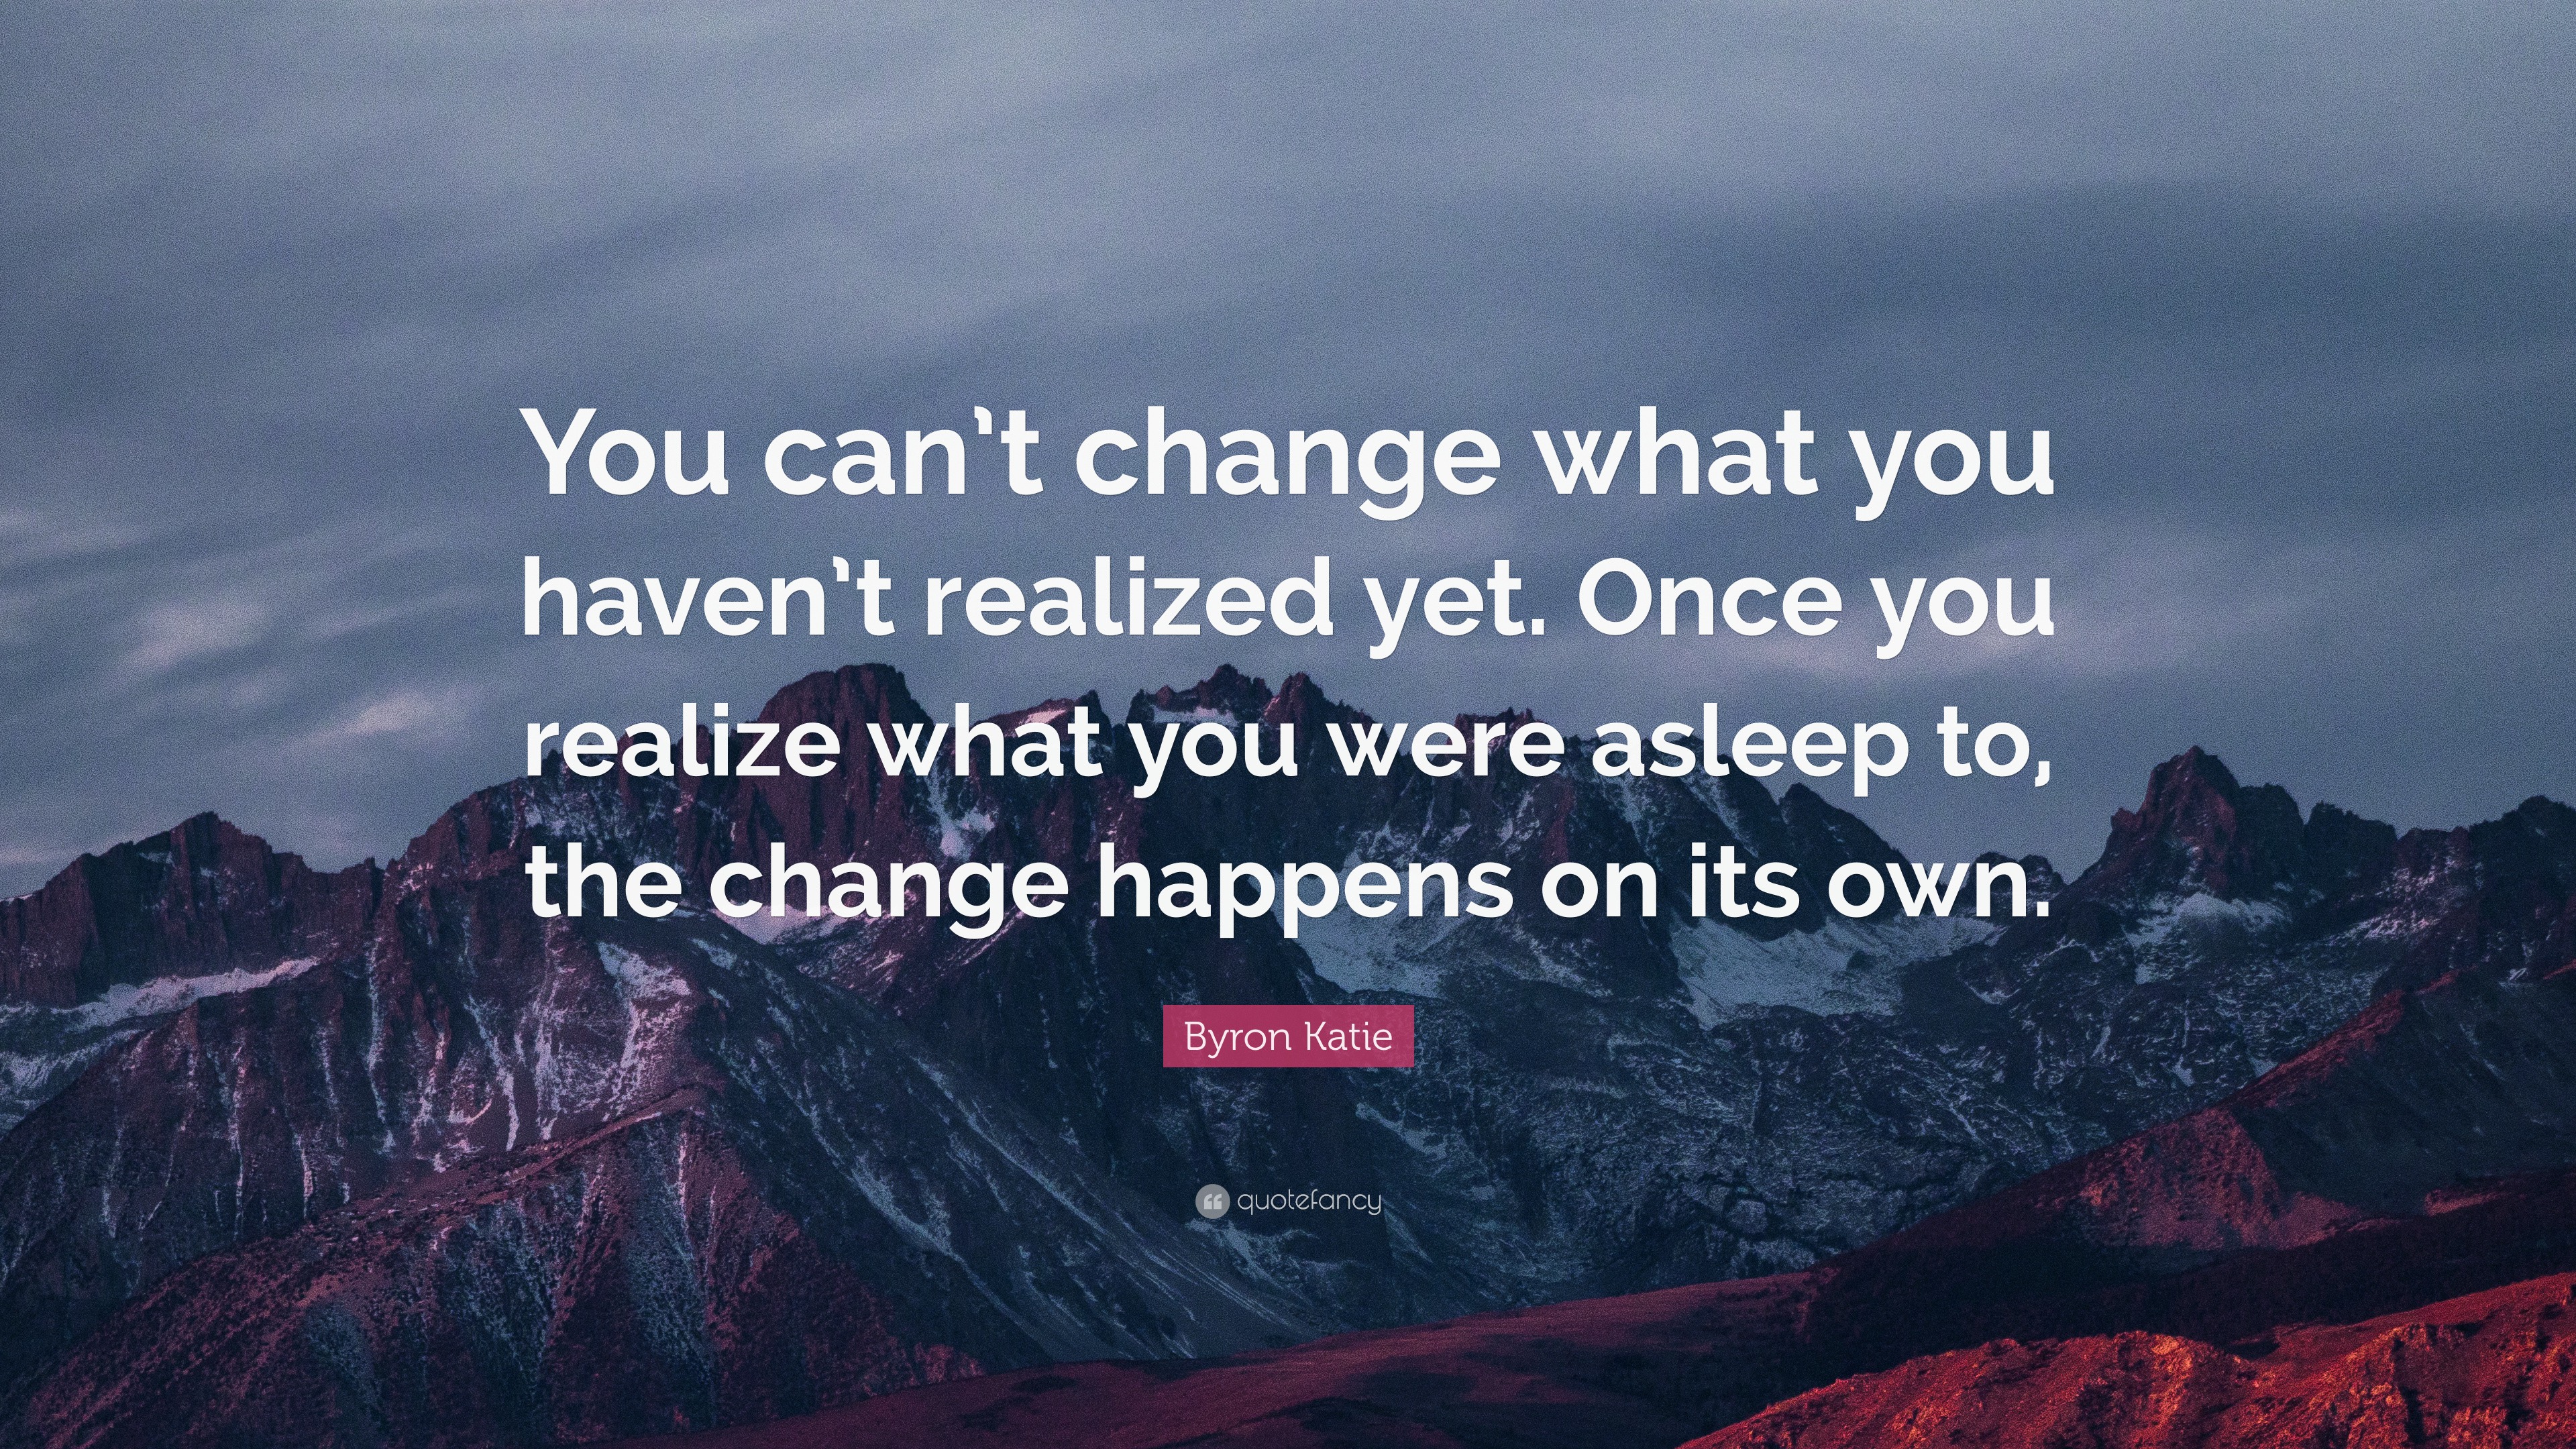 Byron Katie Quote: “You can’t change what you haven’t realized yet ...